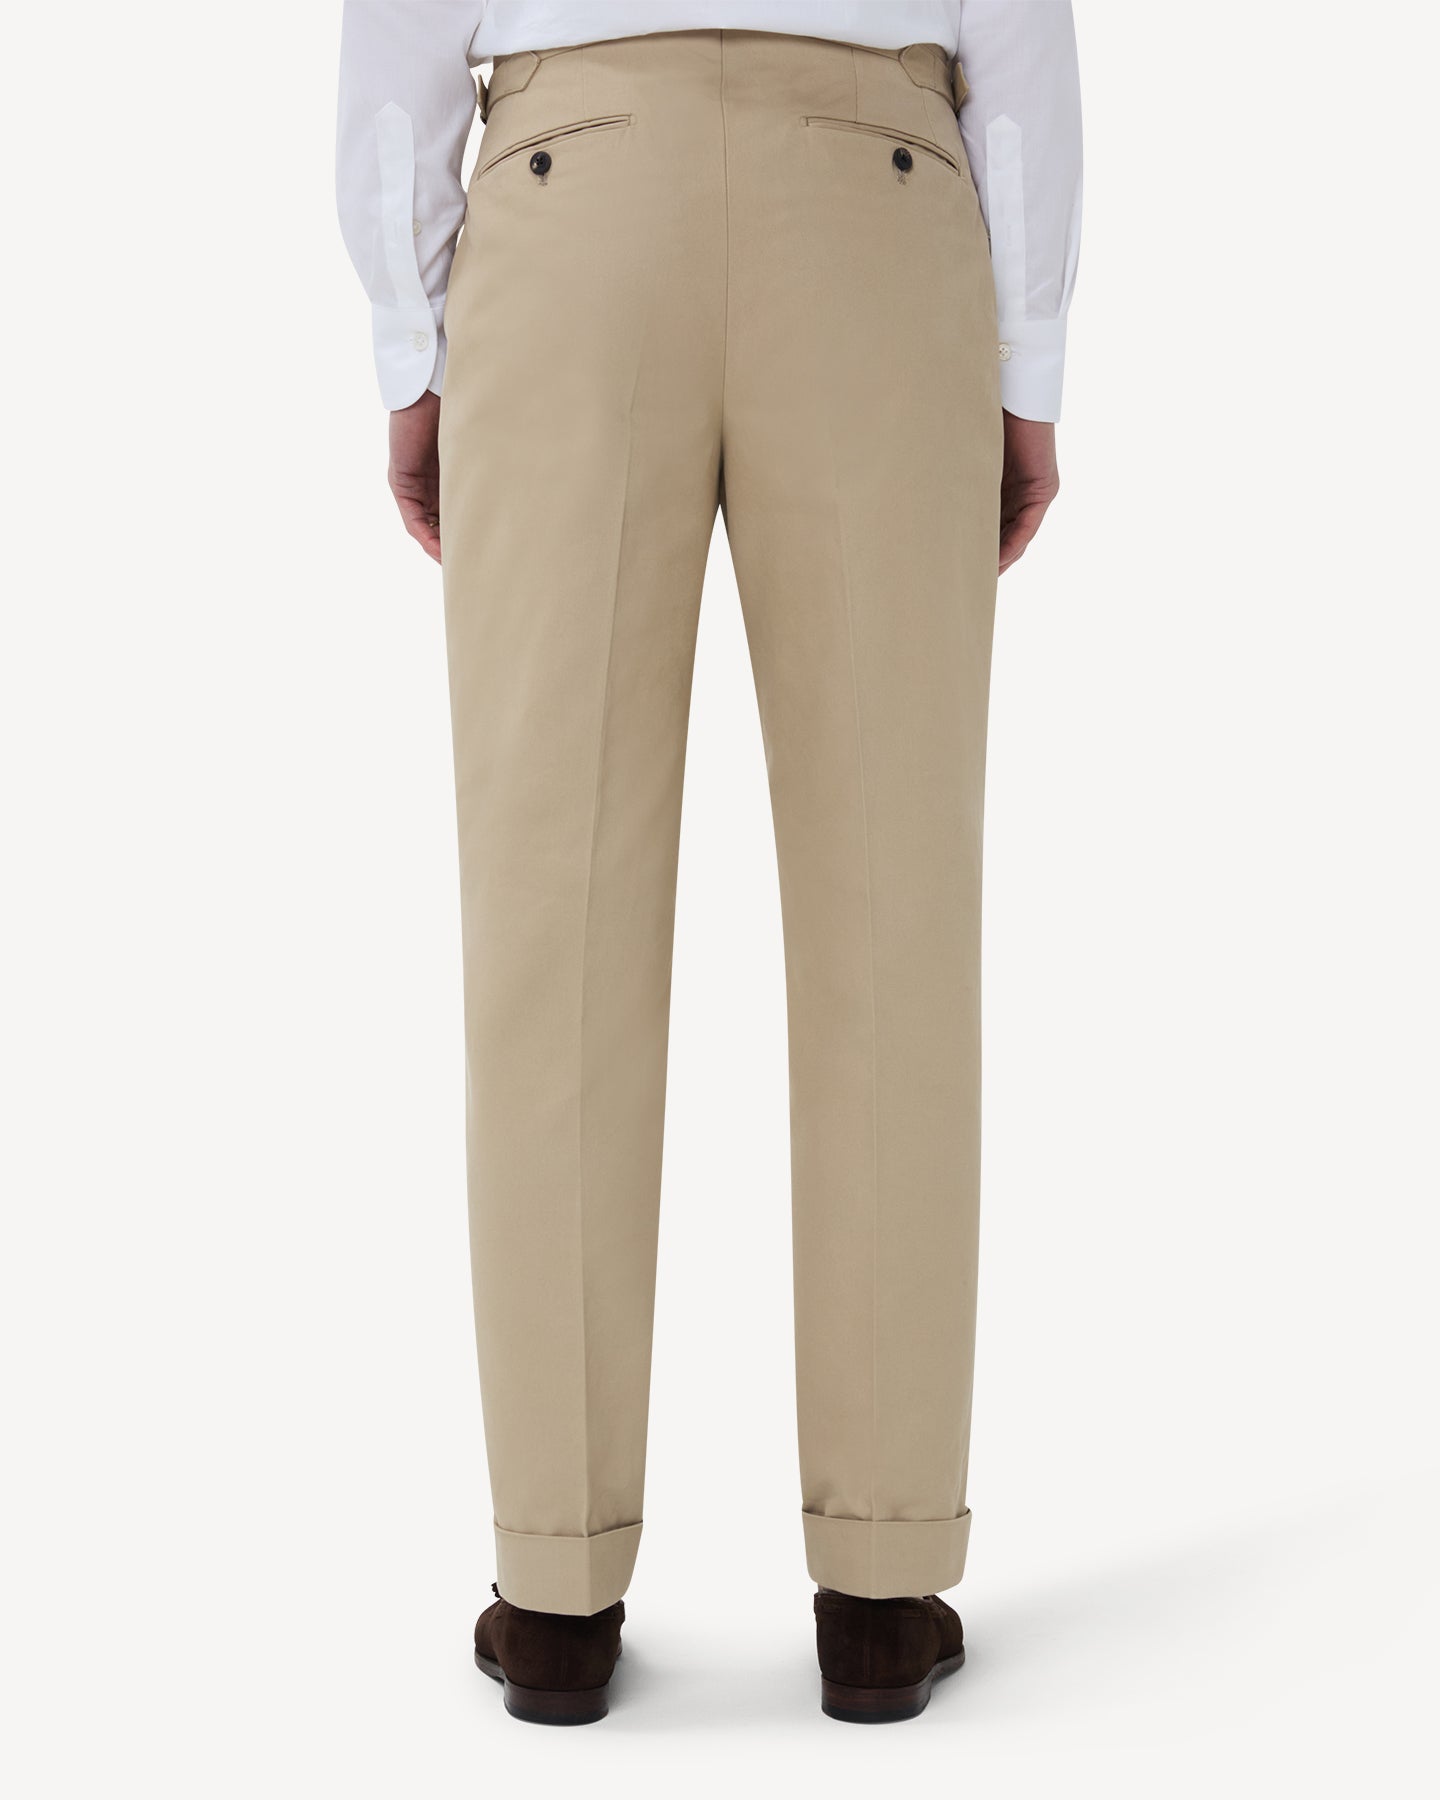 The back of stone cotton trousers with single pleats and side adjusters